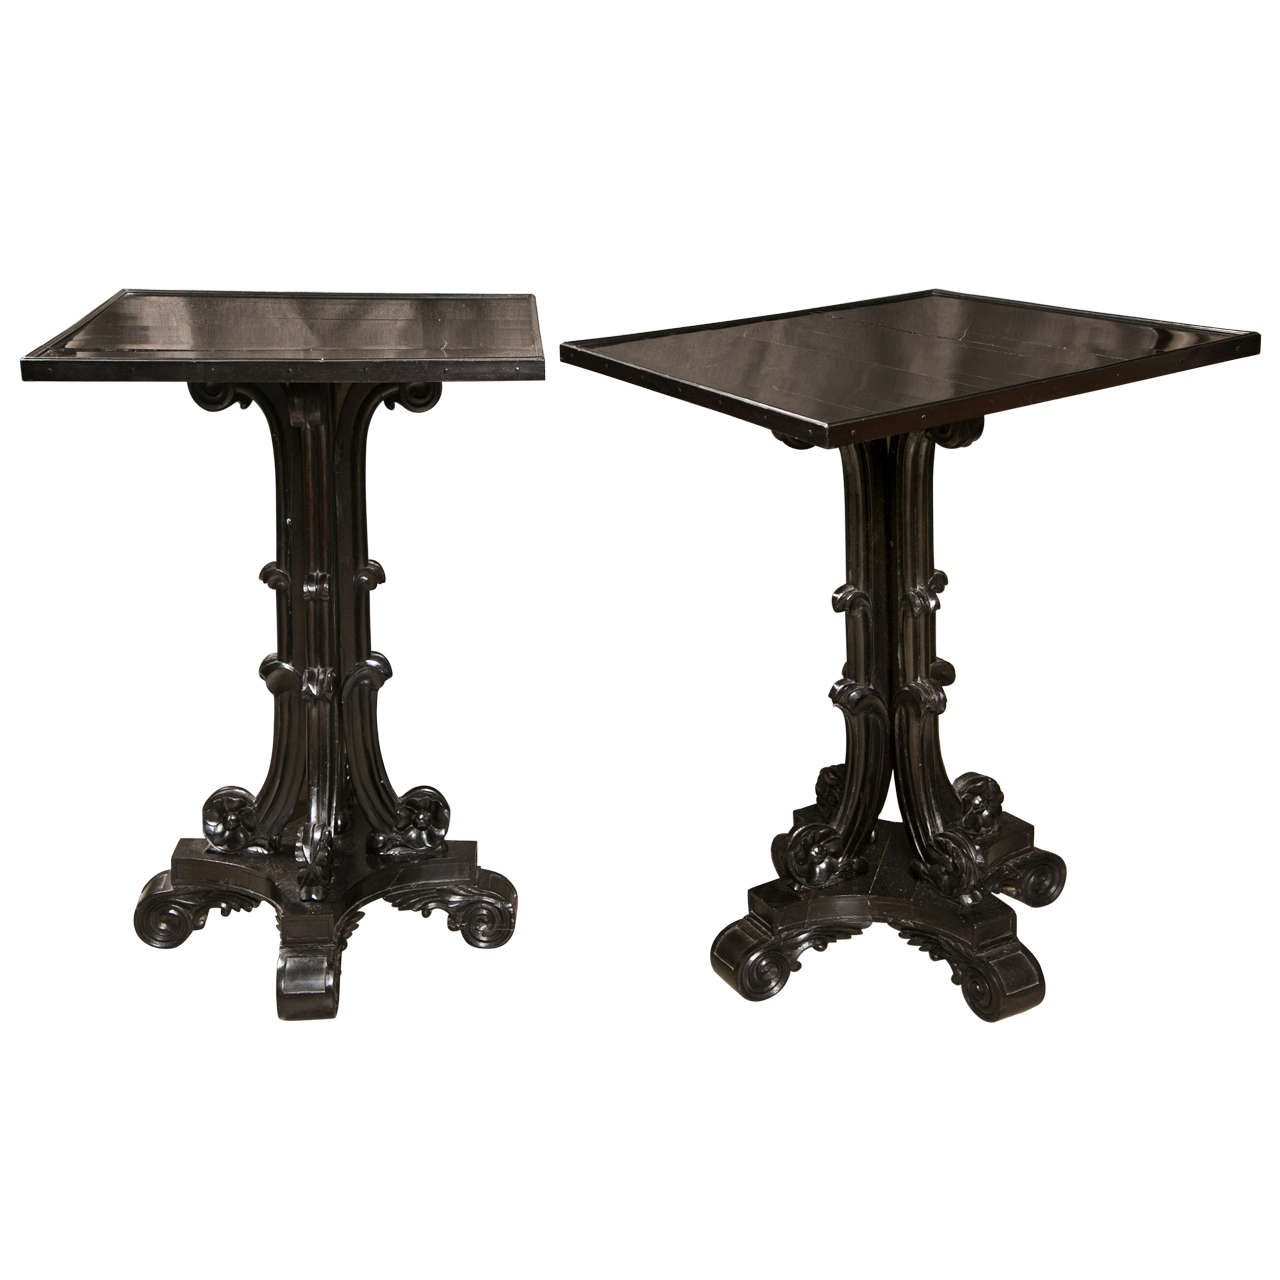 Pair of Early 19th Century Ebony Side Tables